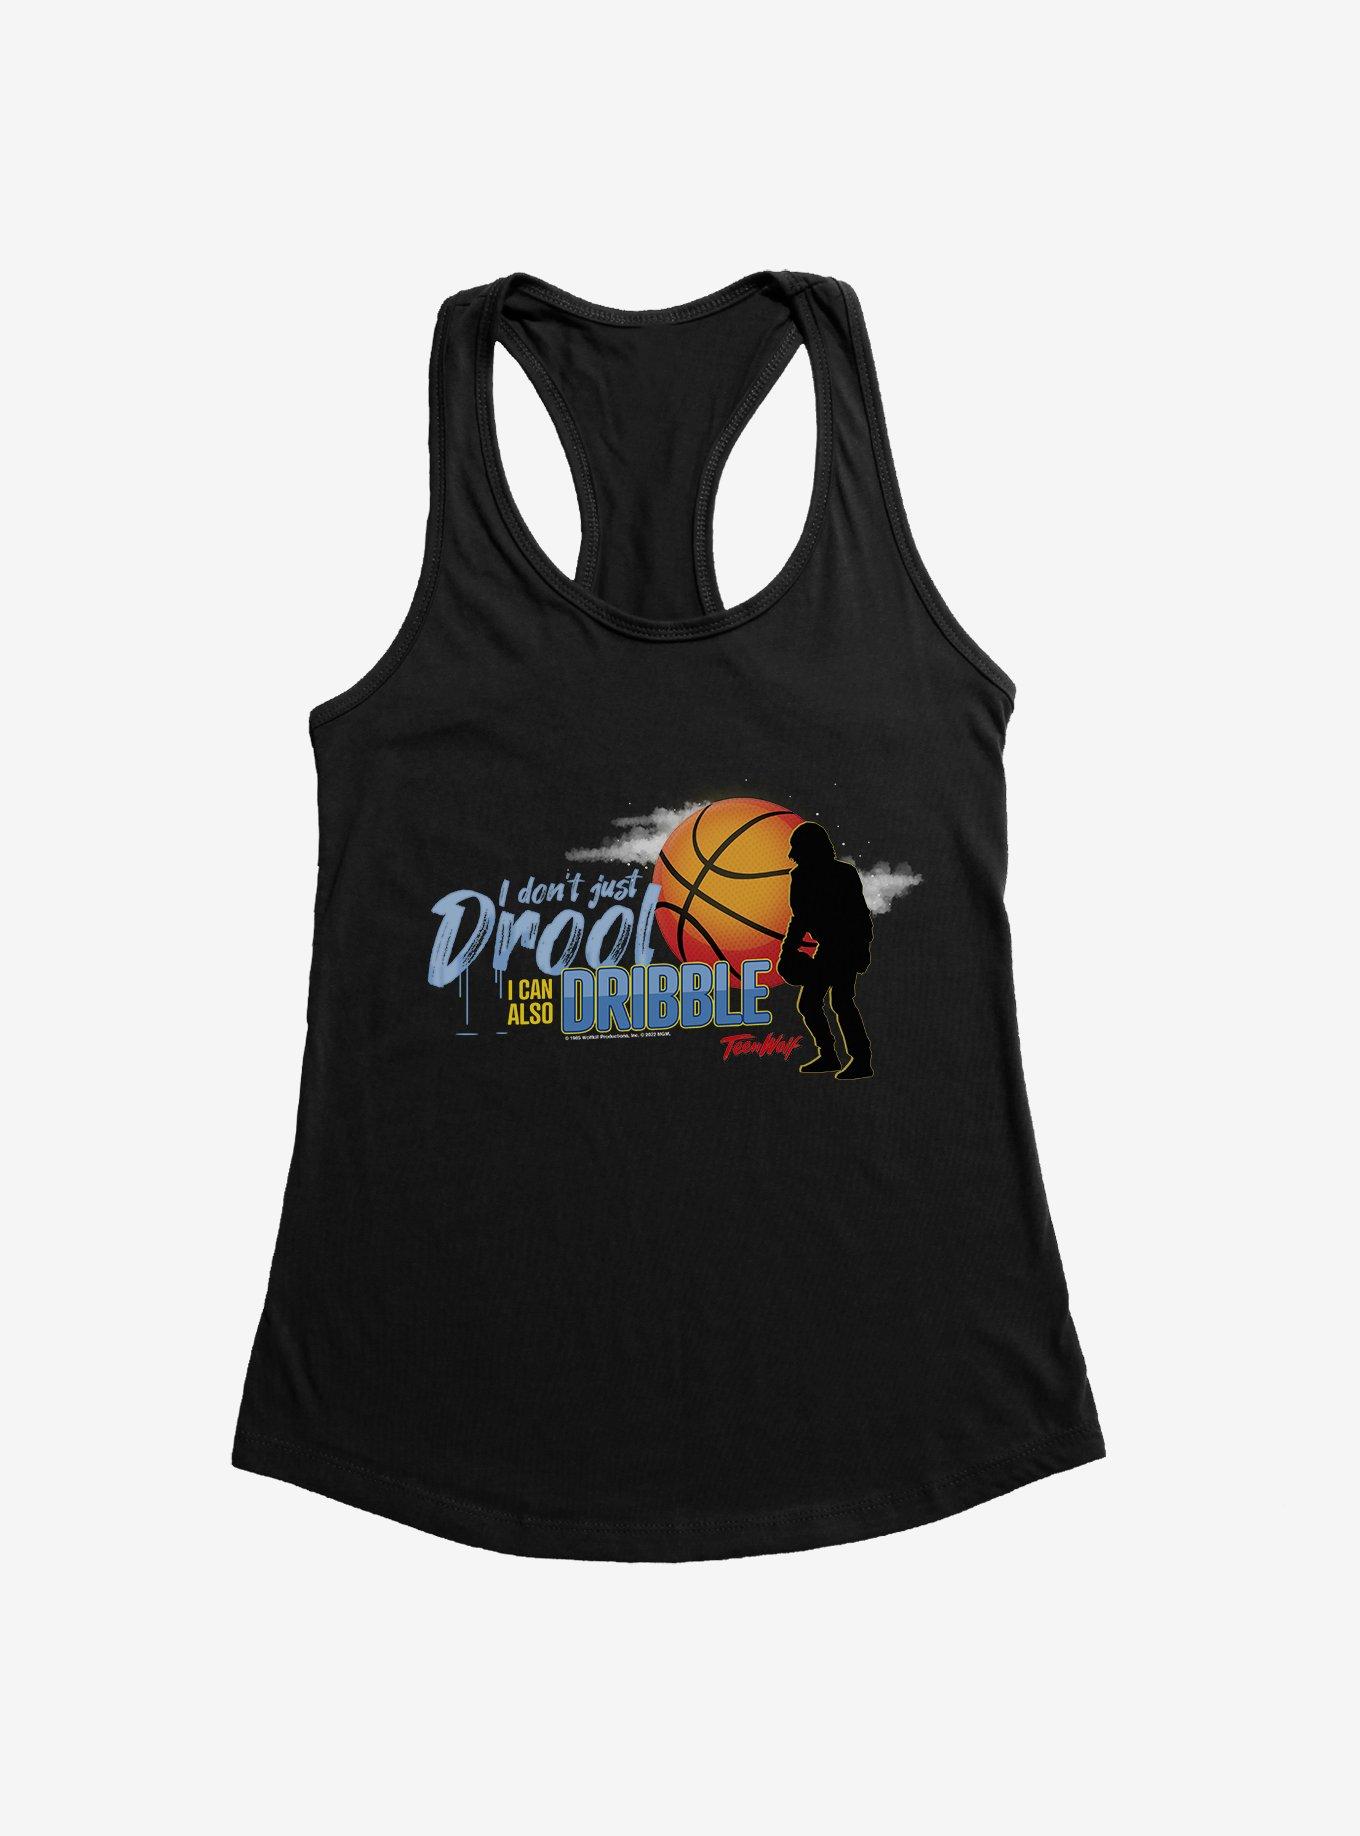 Teen Wolf I Can Also Dribble Womens Tank Top, BLACK, hi-res